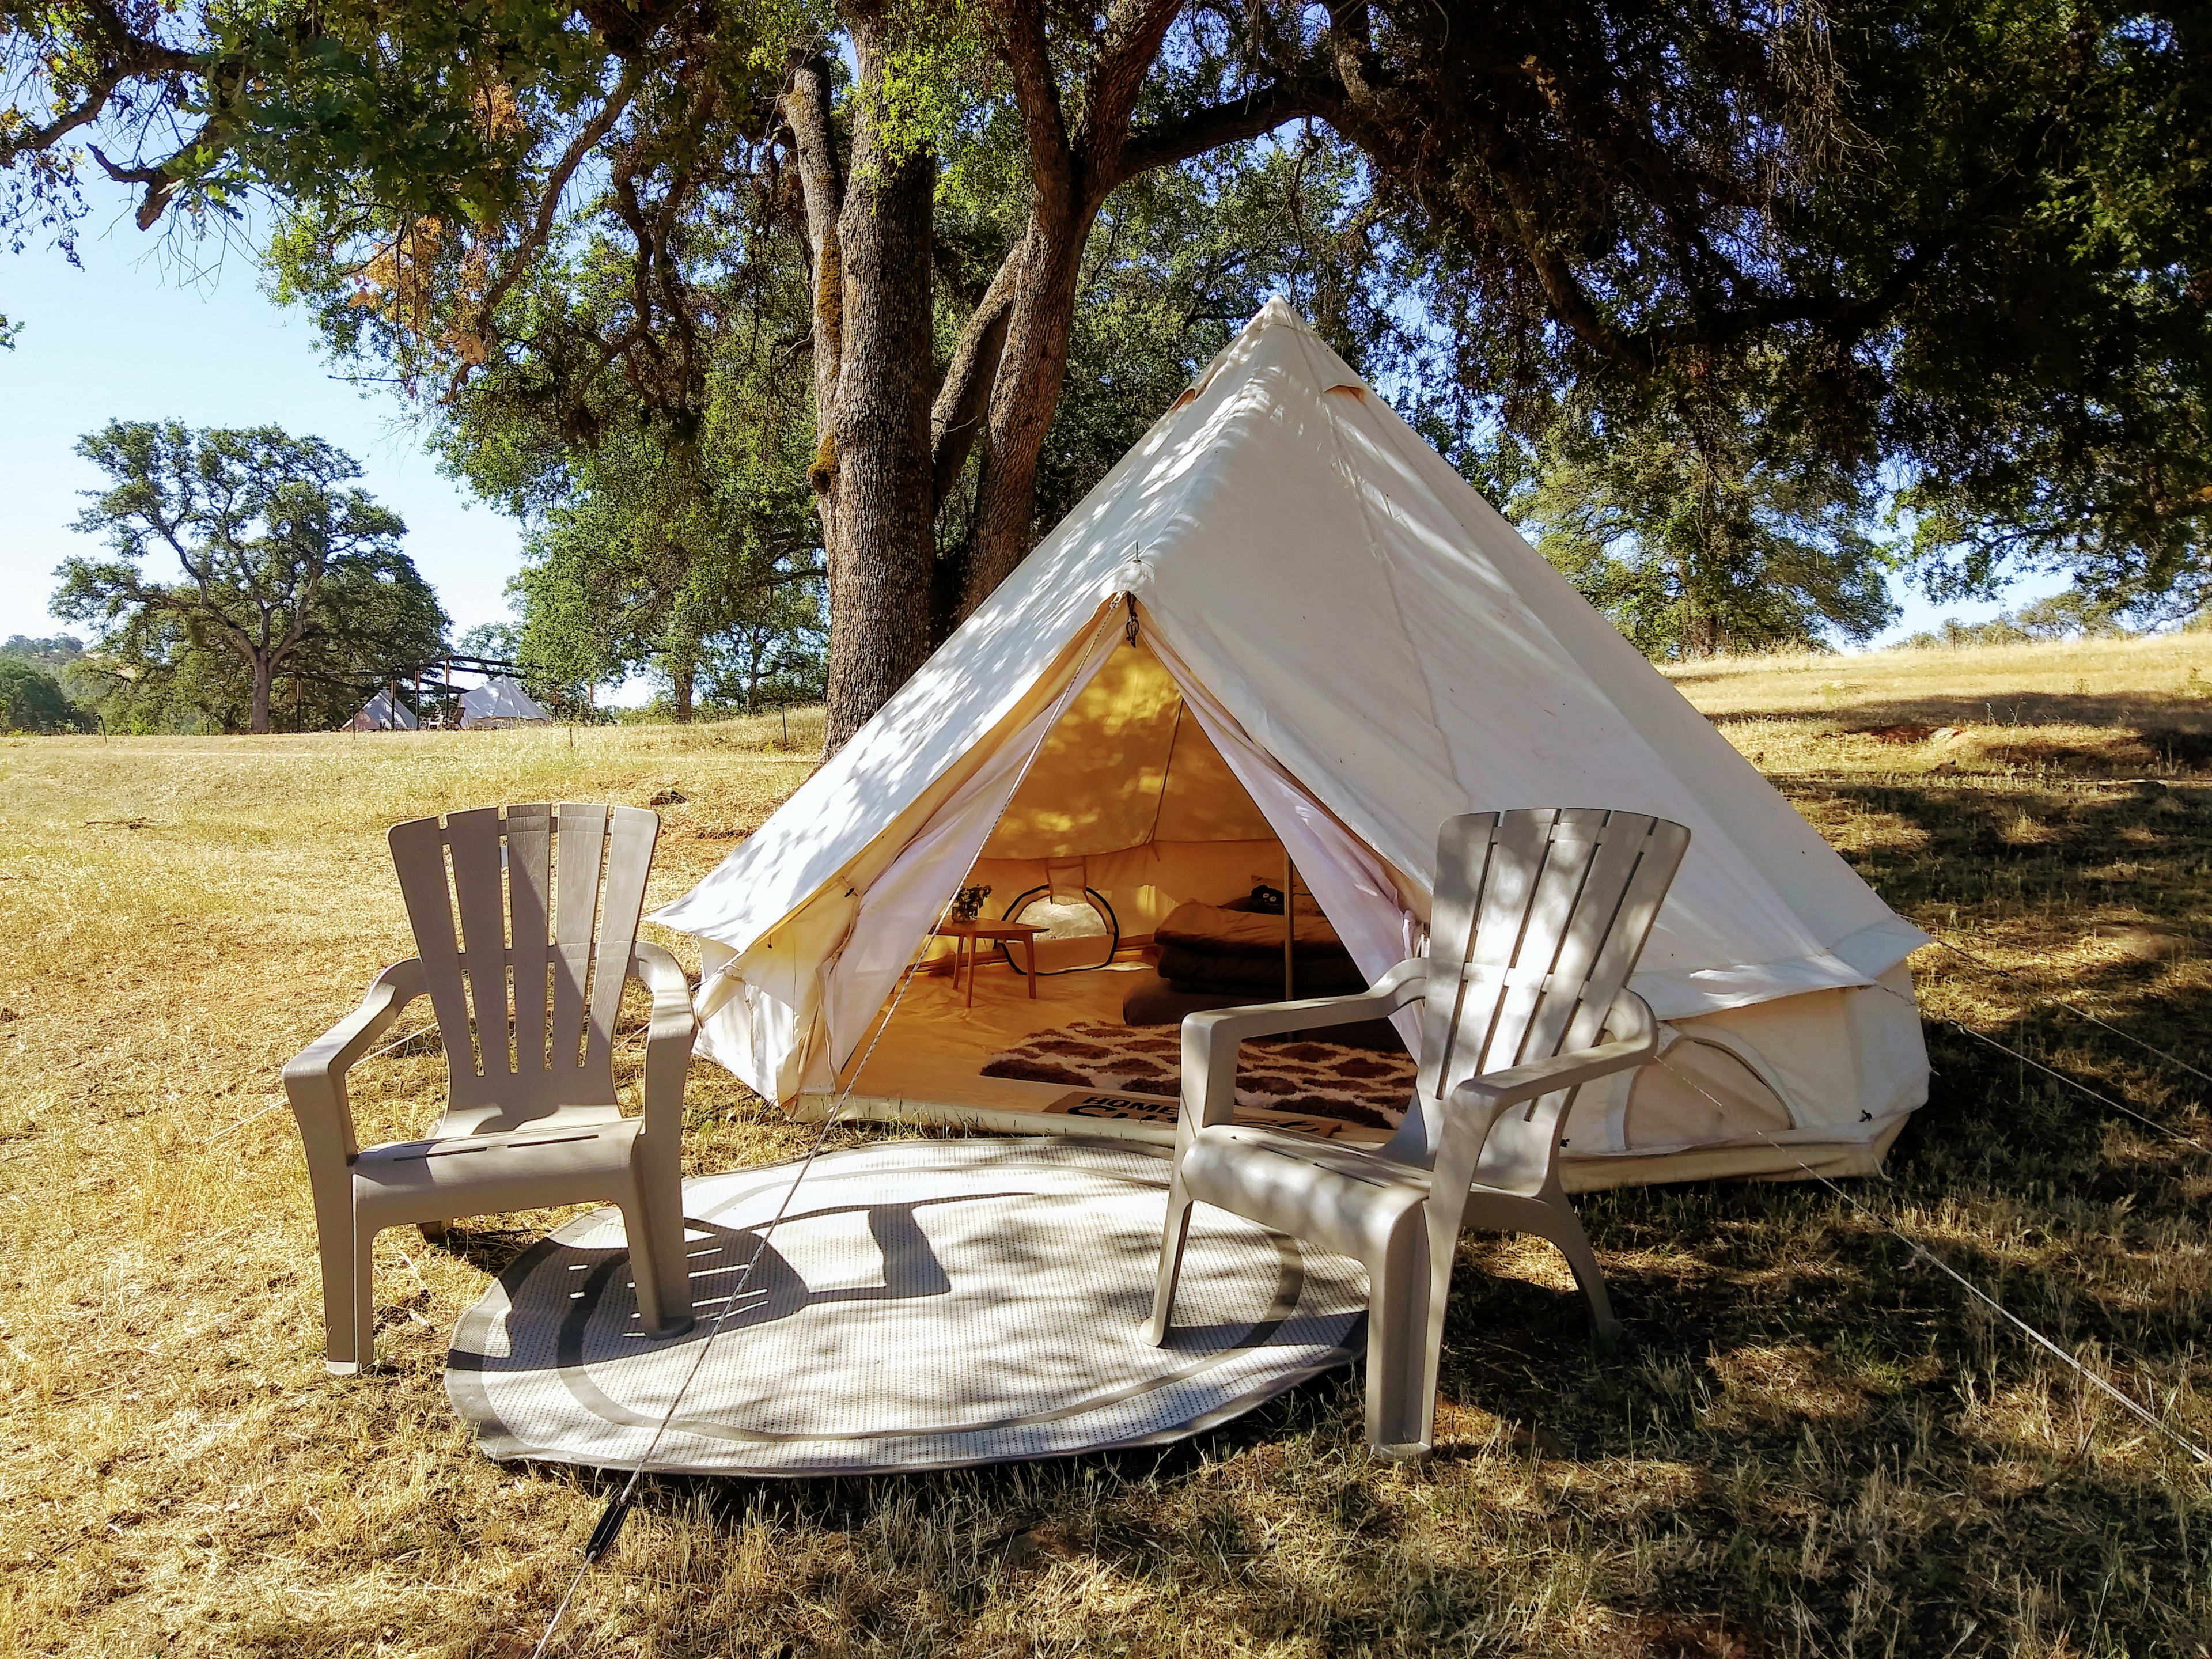 Yurt style tent with outdoor chairs